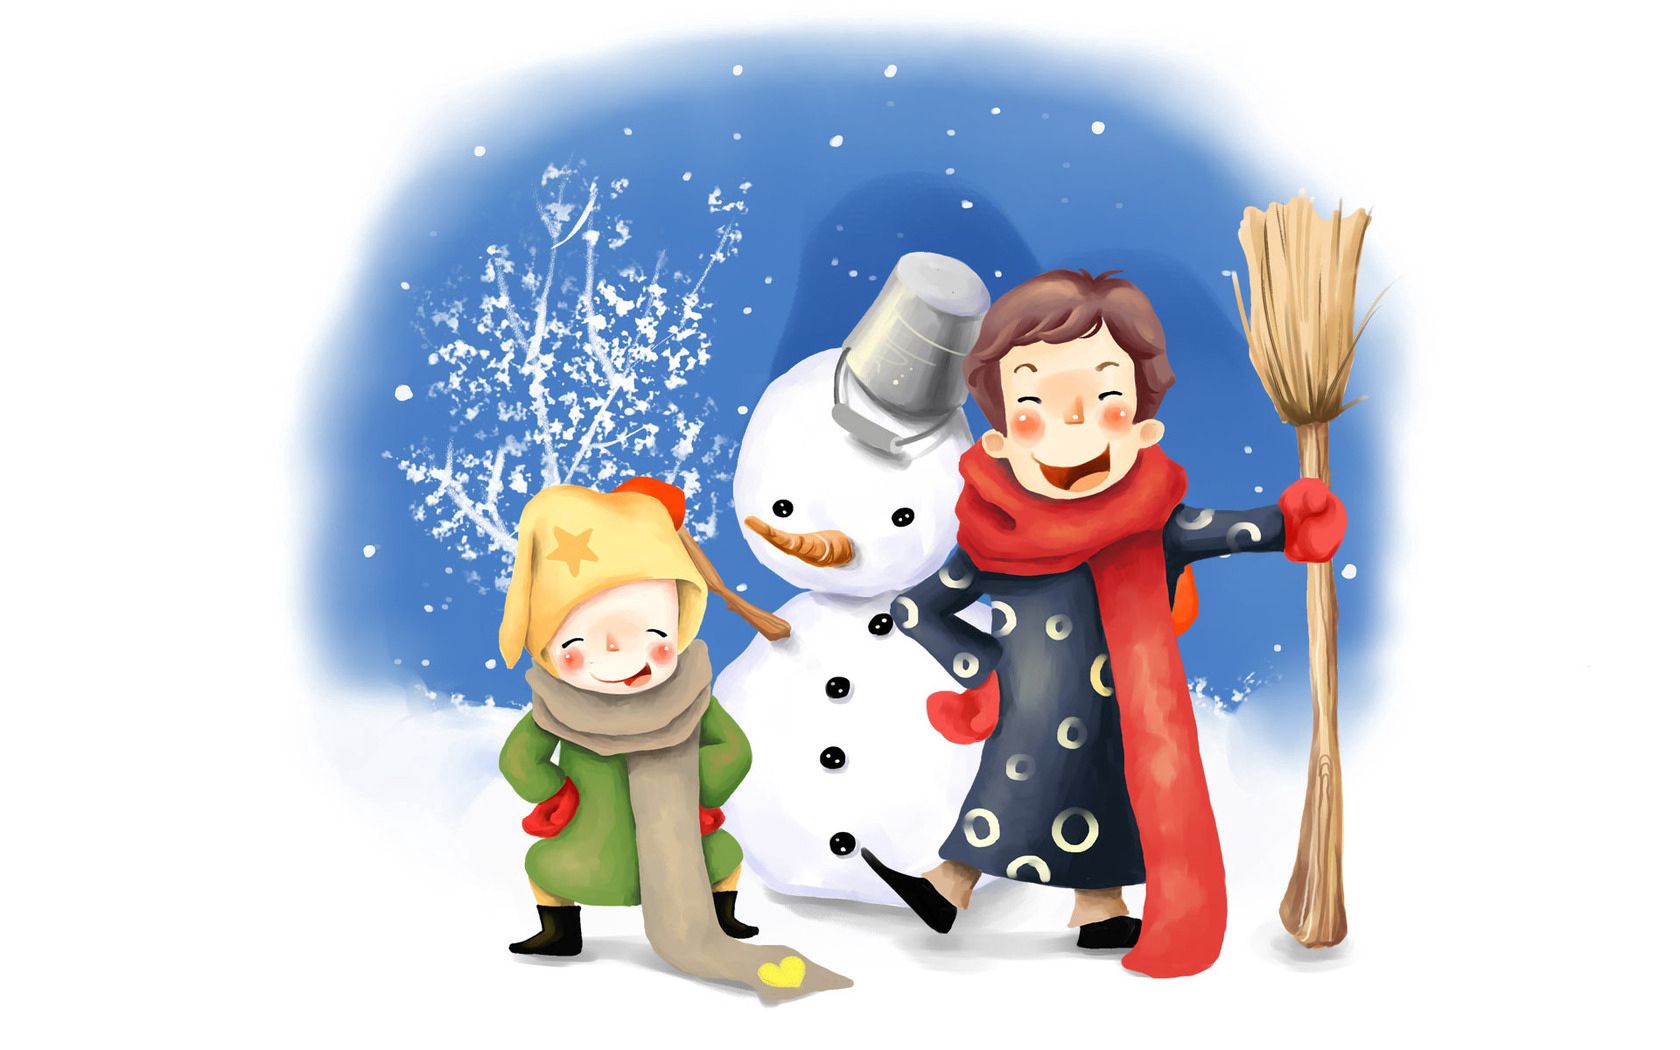 drawing, children, winter, snowman, miscellanea, miscellaneous, picture, buttons, fun, merriment, bucket, scarves, broom High Definition image